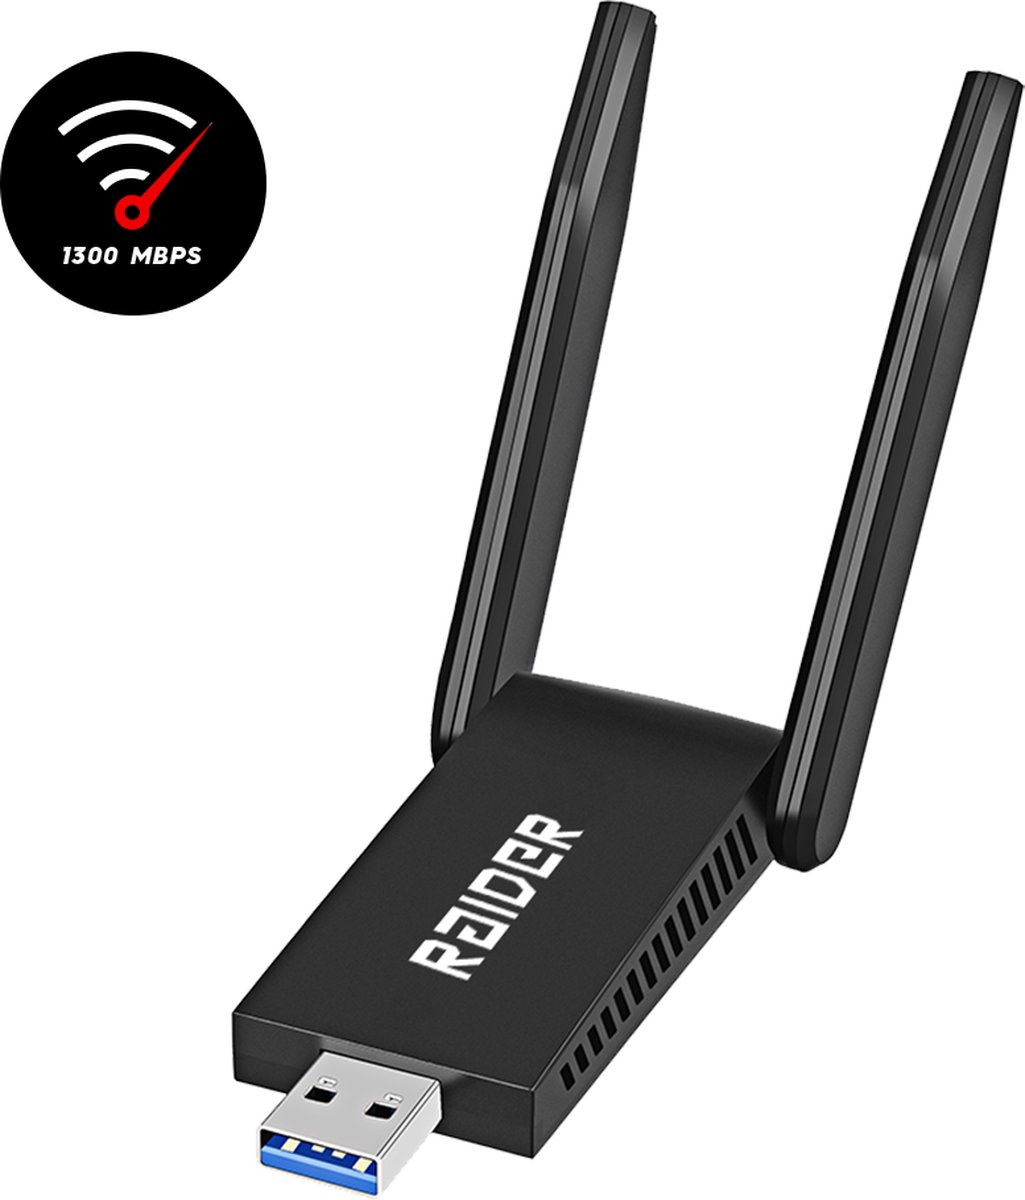 RAIDER PRO WiFi USB 3.0 - AC 1300Mbps - 5Ghz/2.4Ghz Dual-Band - Draadloze Netwerkadapter voor PC/Laptop